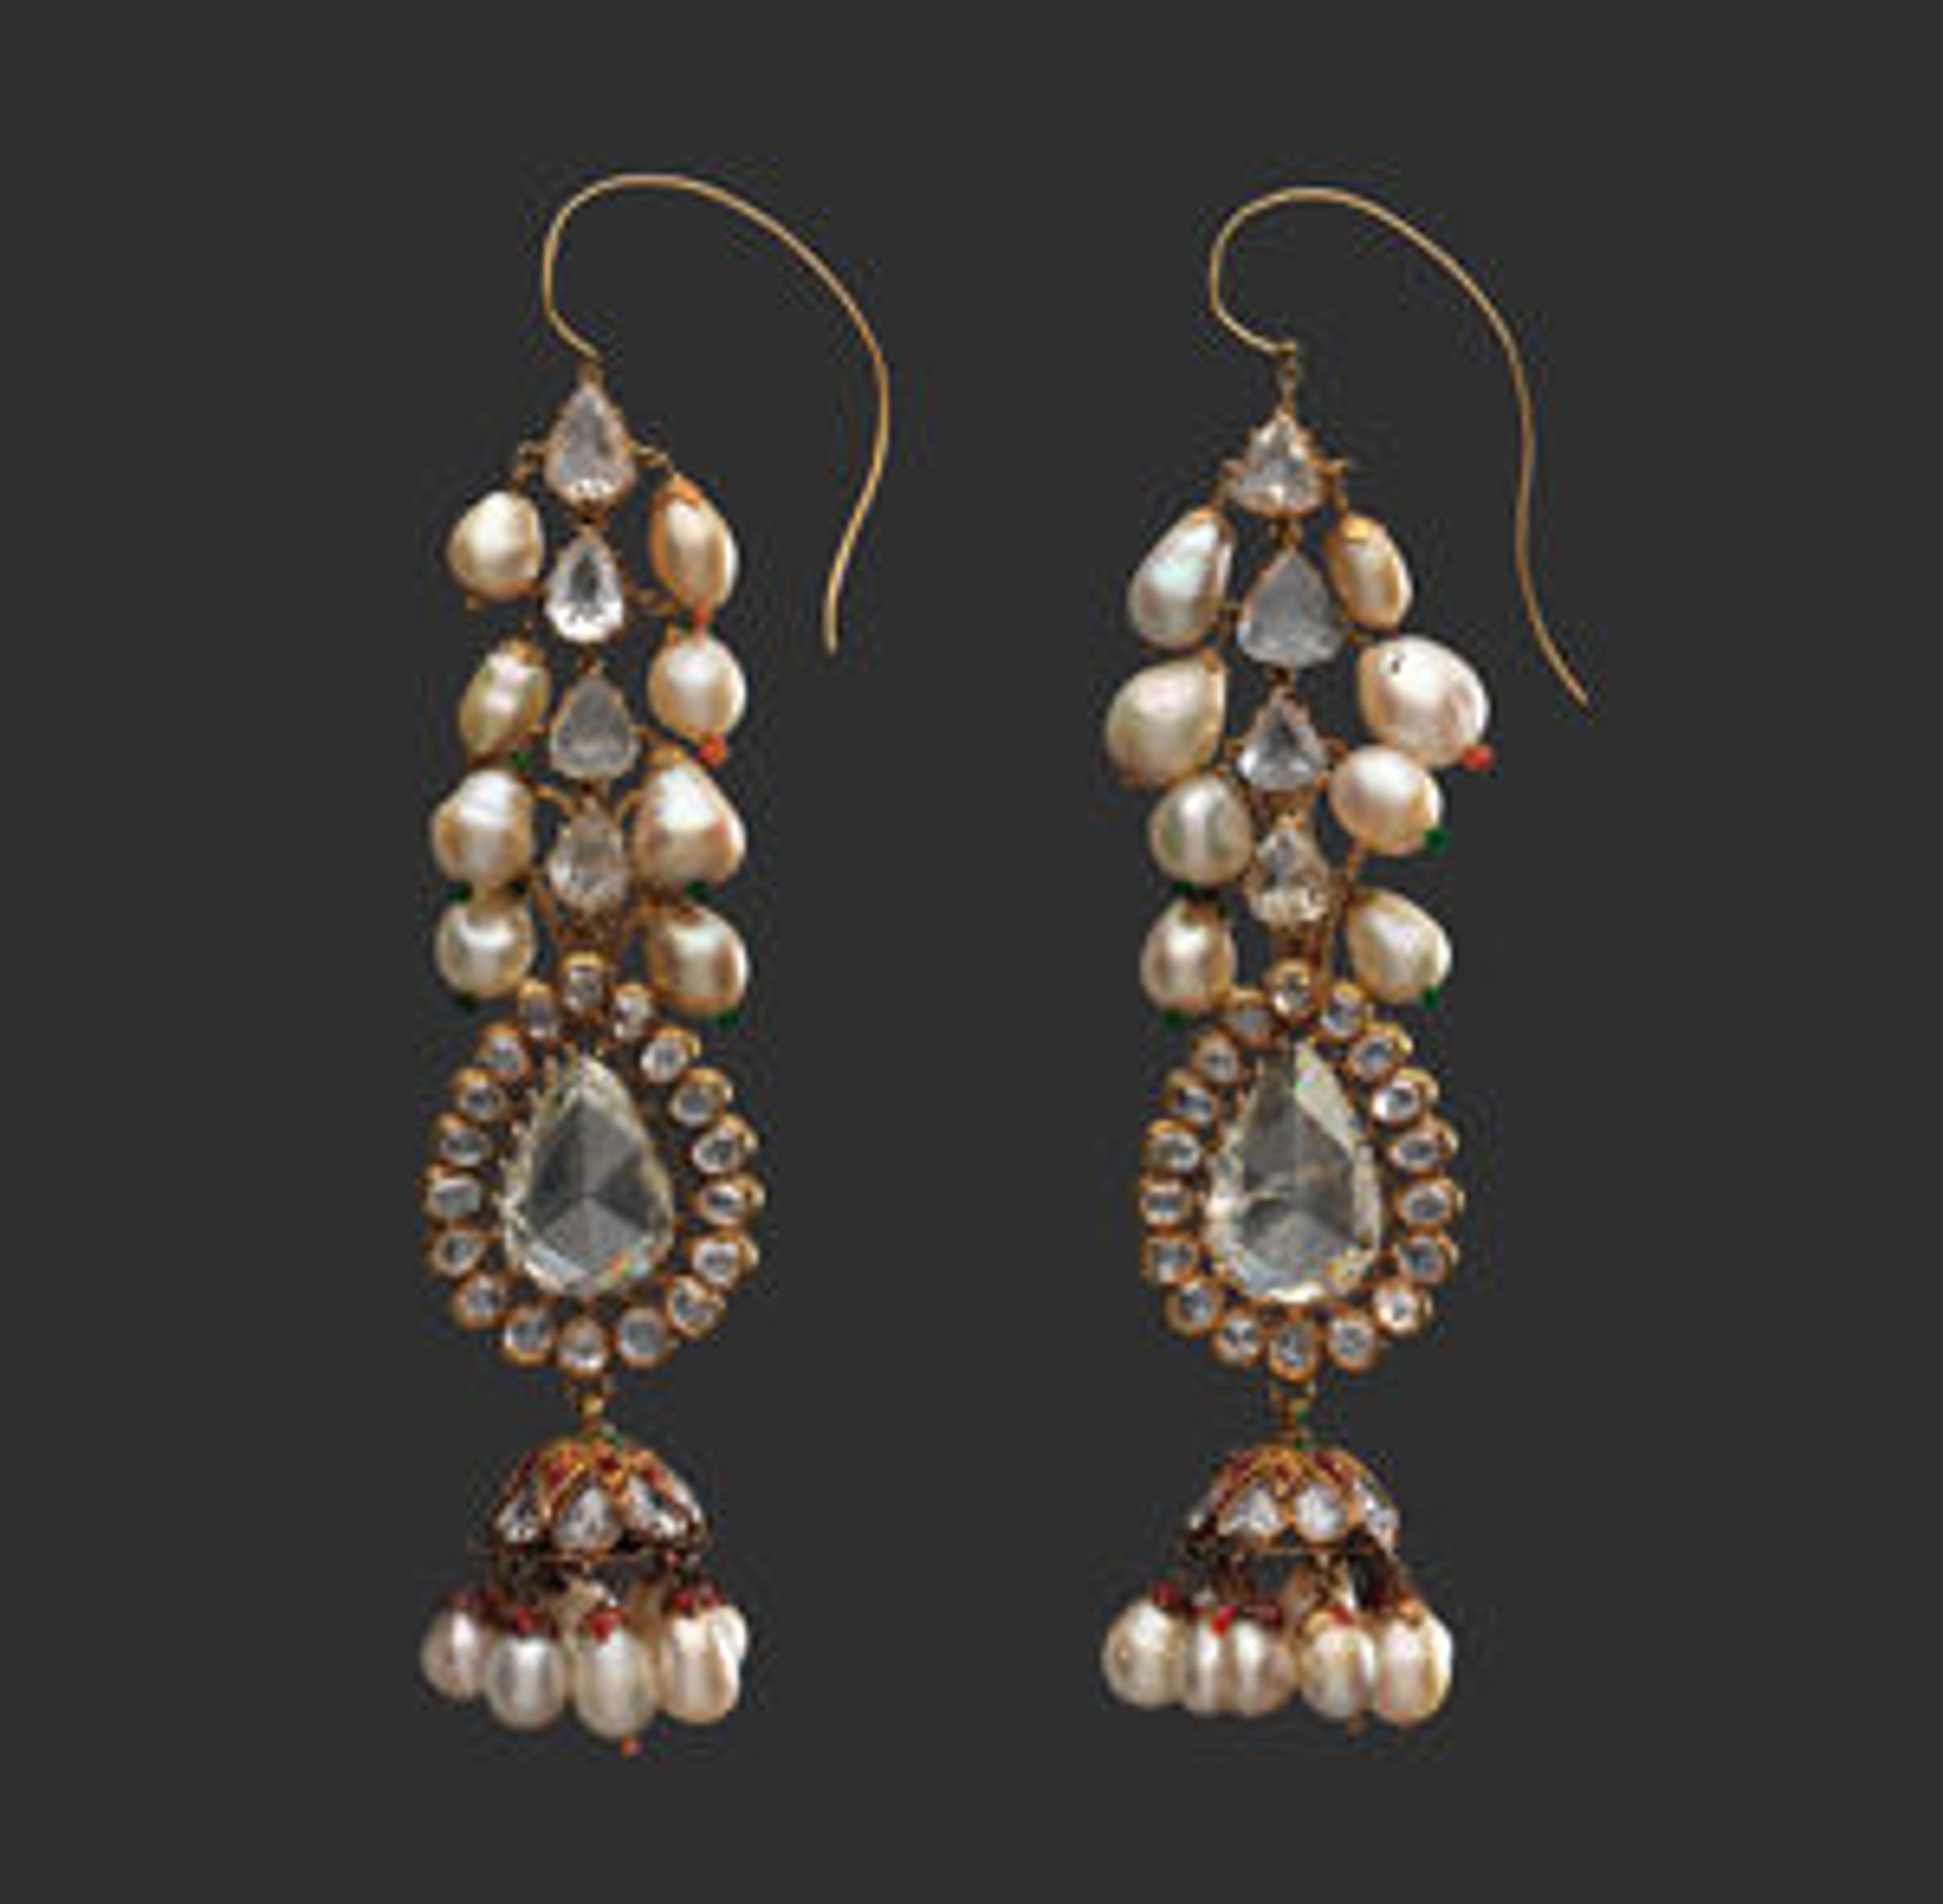 Diamond earrings and pearl supports, late 18th century. India, Deccan, Hyderabad. Islamic. Diamond, pearls, gold, emeralds, and enamel. Private Collection, New York